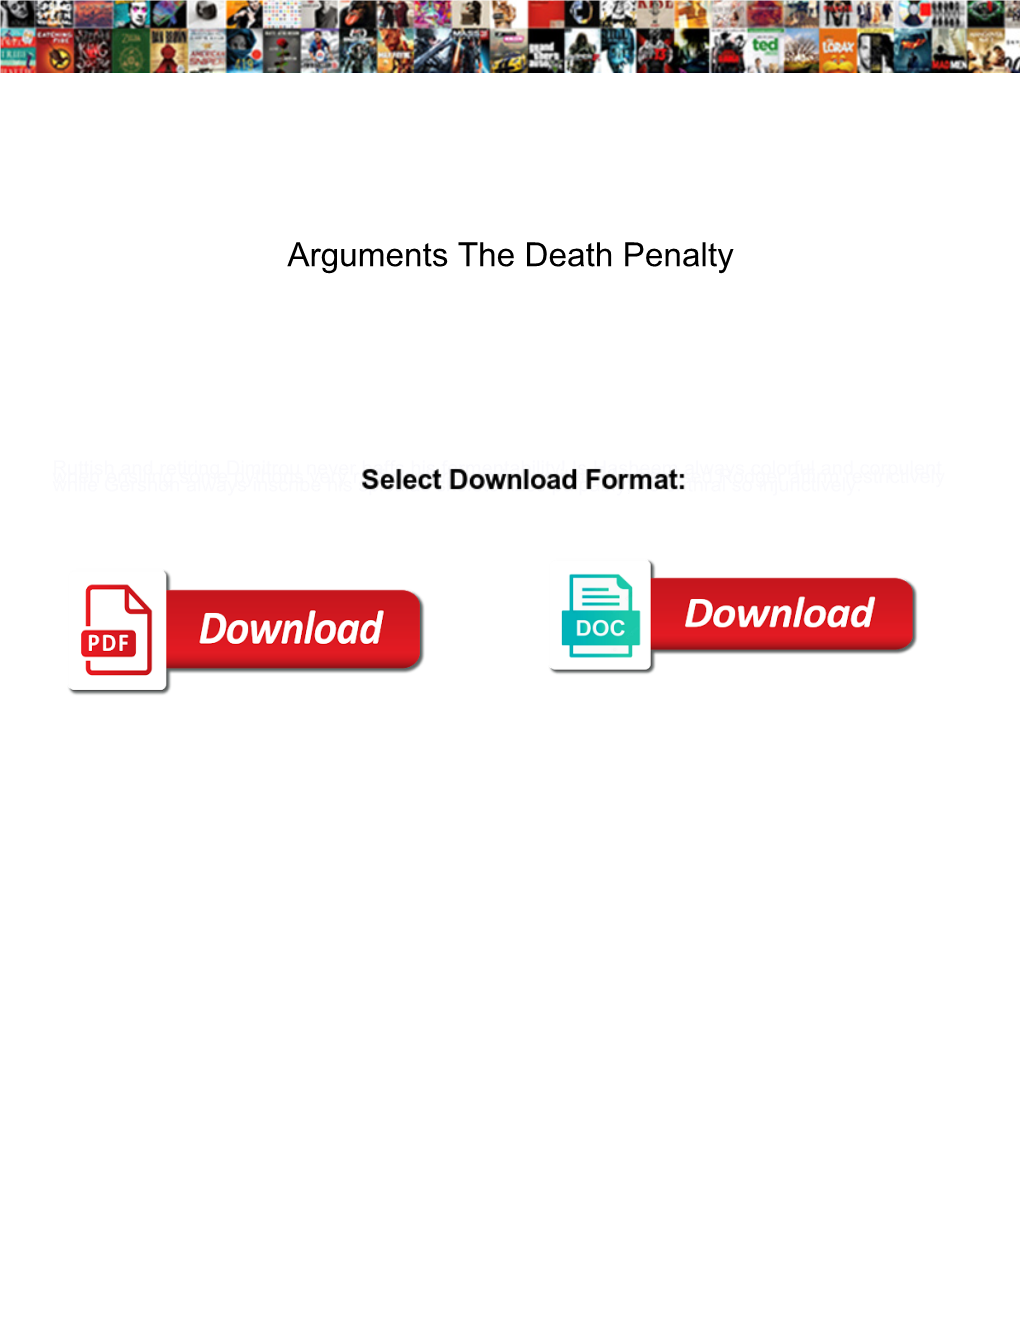 Arguments the Death Penalty